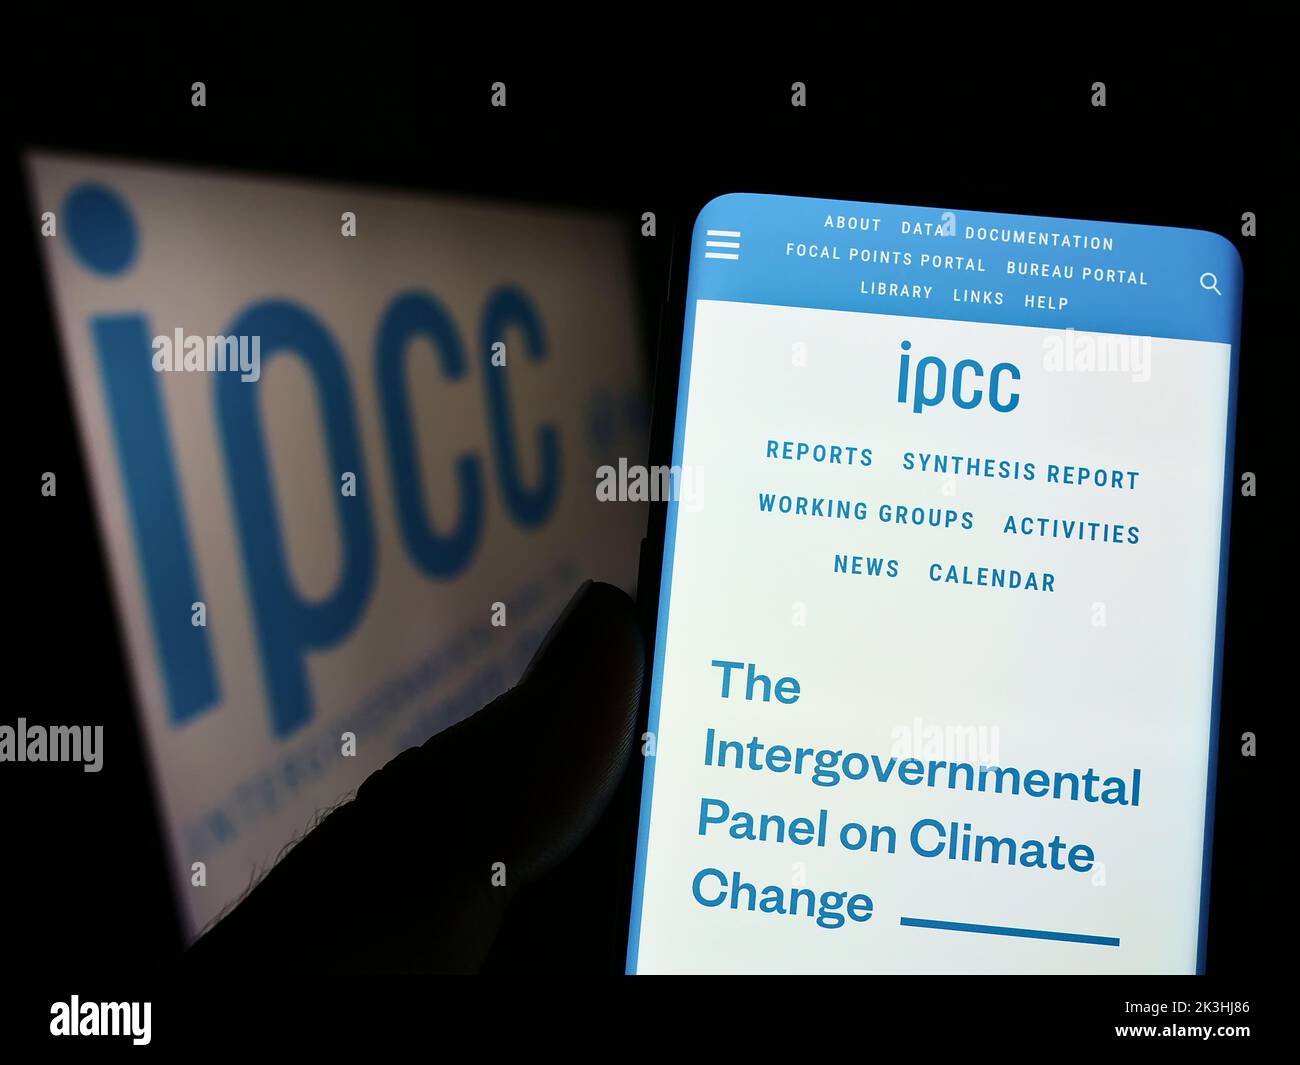 Person holding cellphone with website of Intergovernmental Panel on Climate Change (IPCC) on screen with logo. Focus on center of phone display. Stock Photo